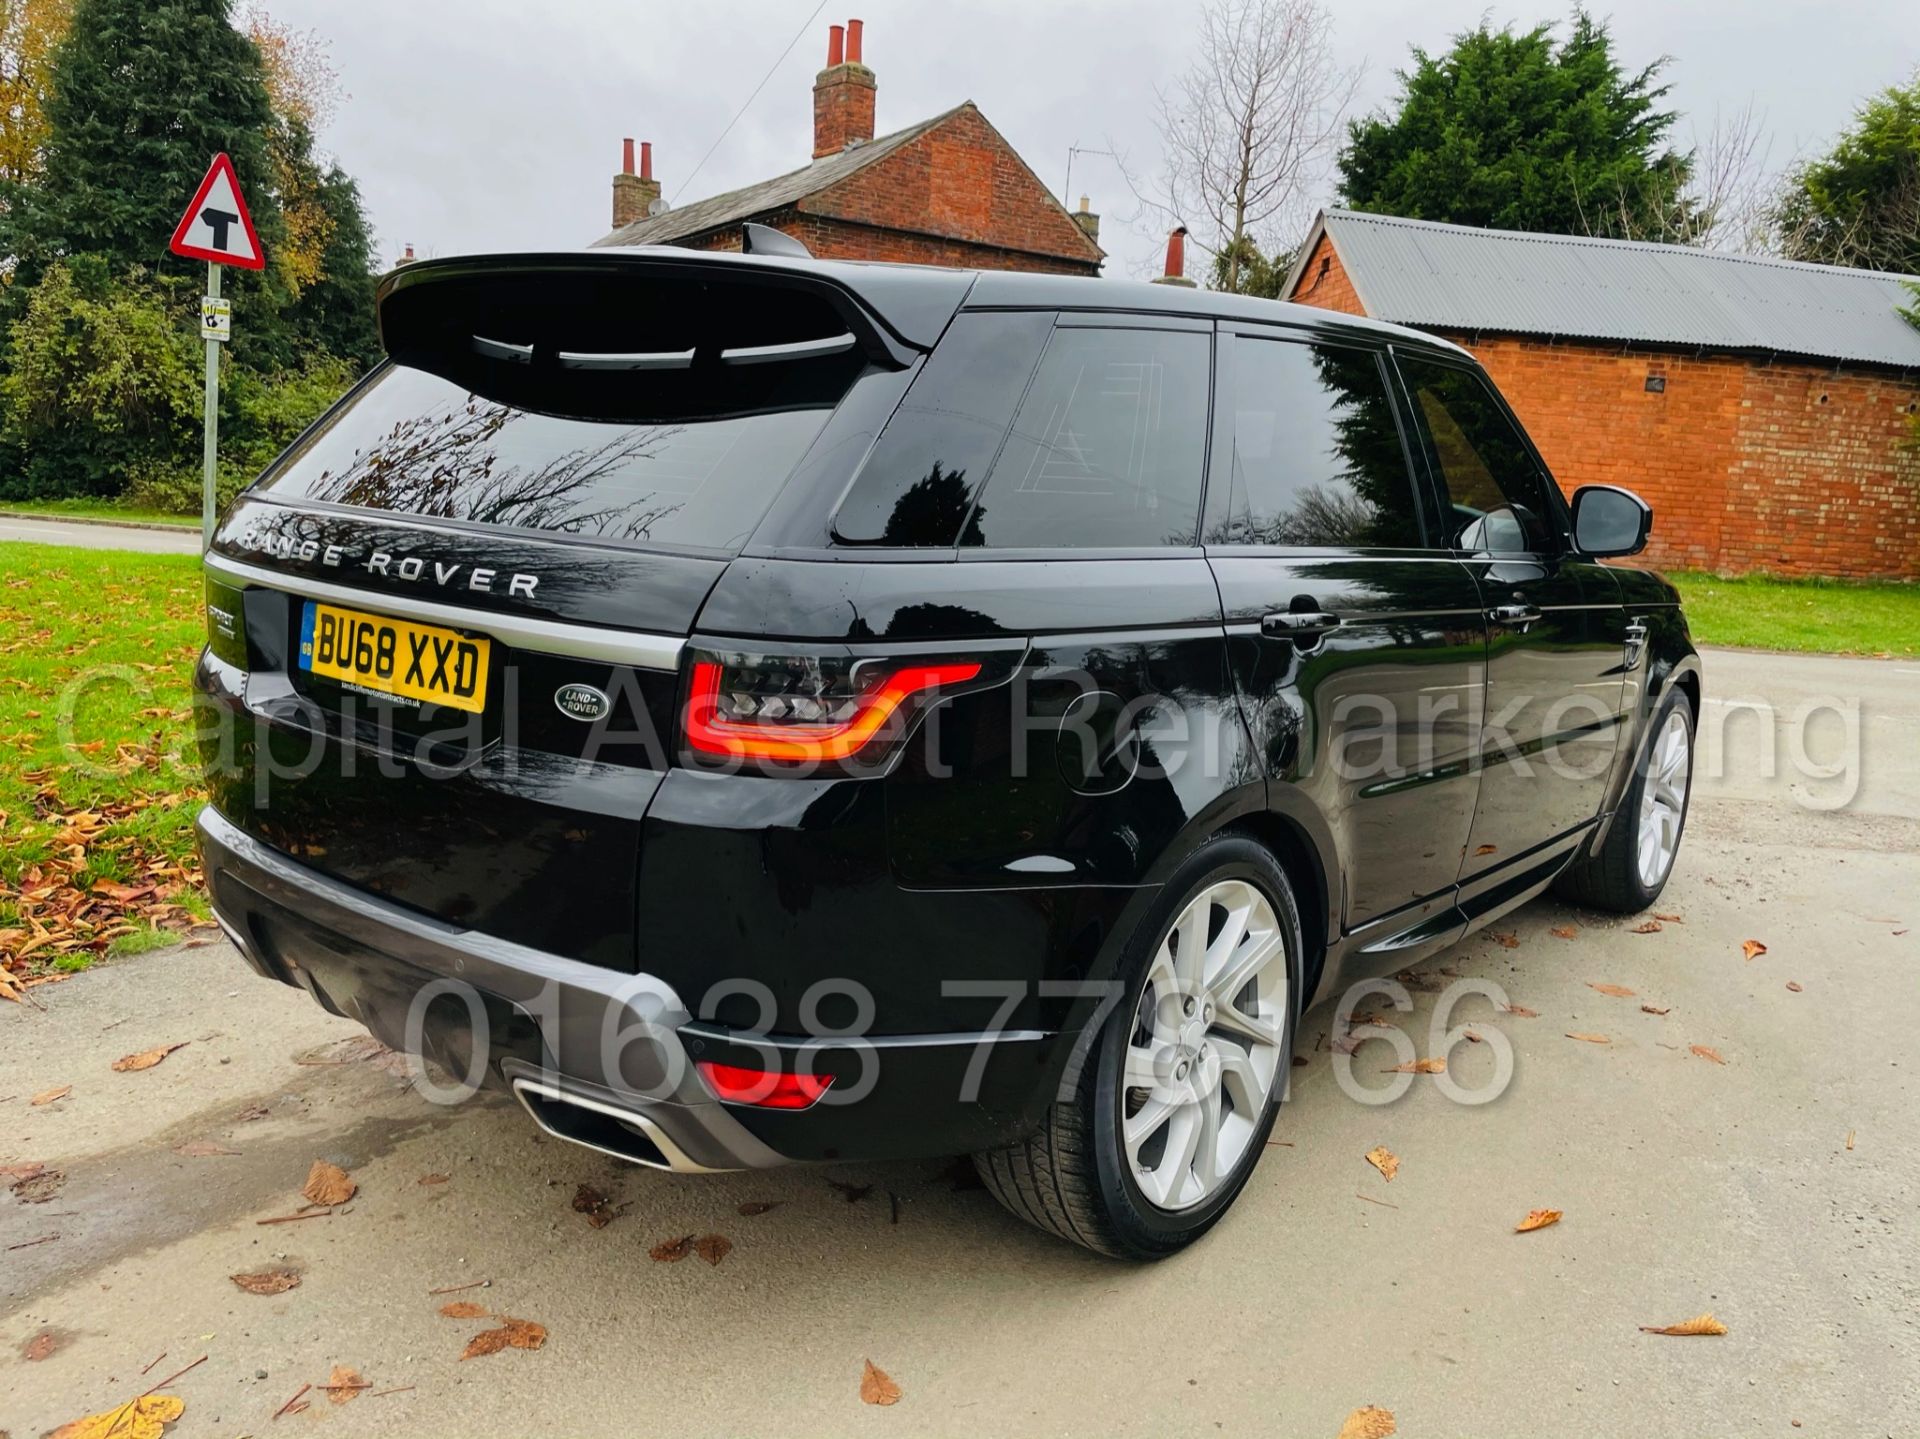 RANGE ROVER SPORT *HSE EDITION* SUV (2019 MODEL) '3.0 SDV6 - 306 BHP - 8 SPEED AUTO' *FULLY LOADED* - Image 12 of 56